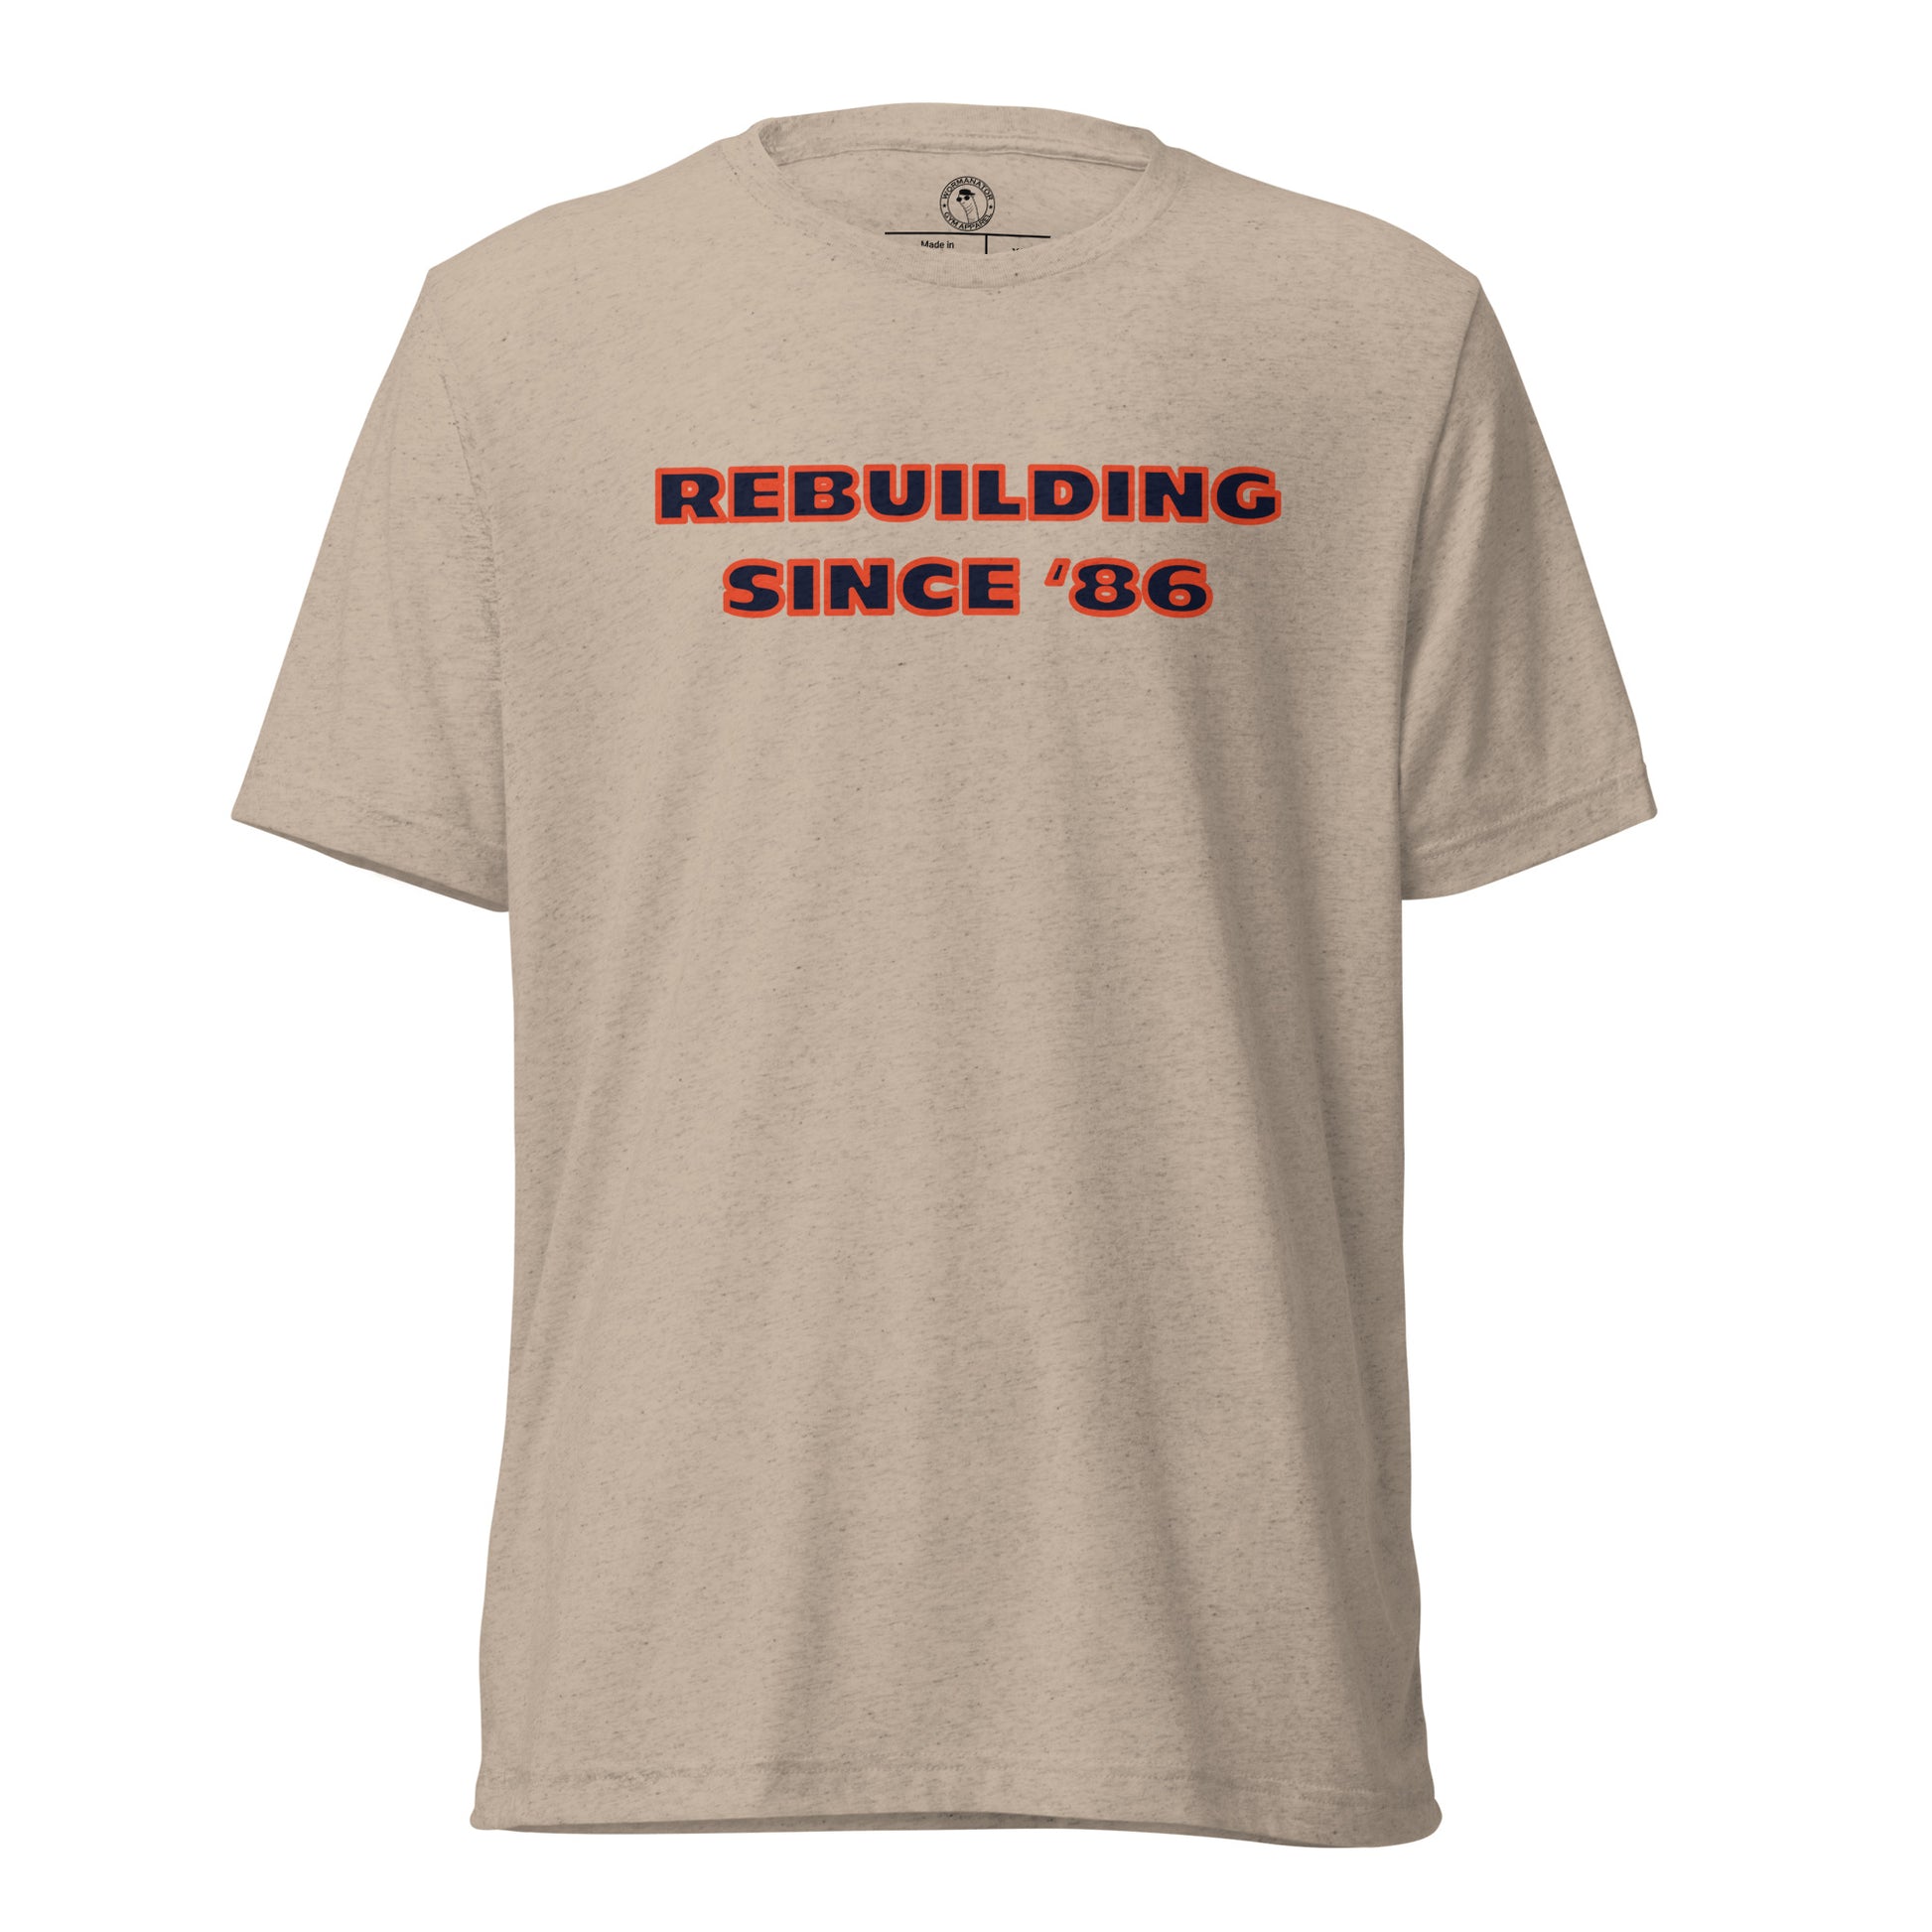 Chicago Bears Rebuilding Since 1986 Shirt in Tan Triblend - Front